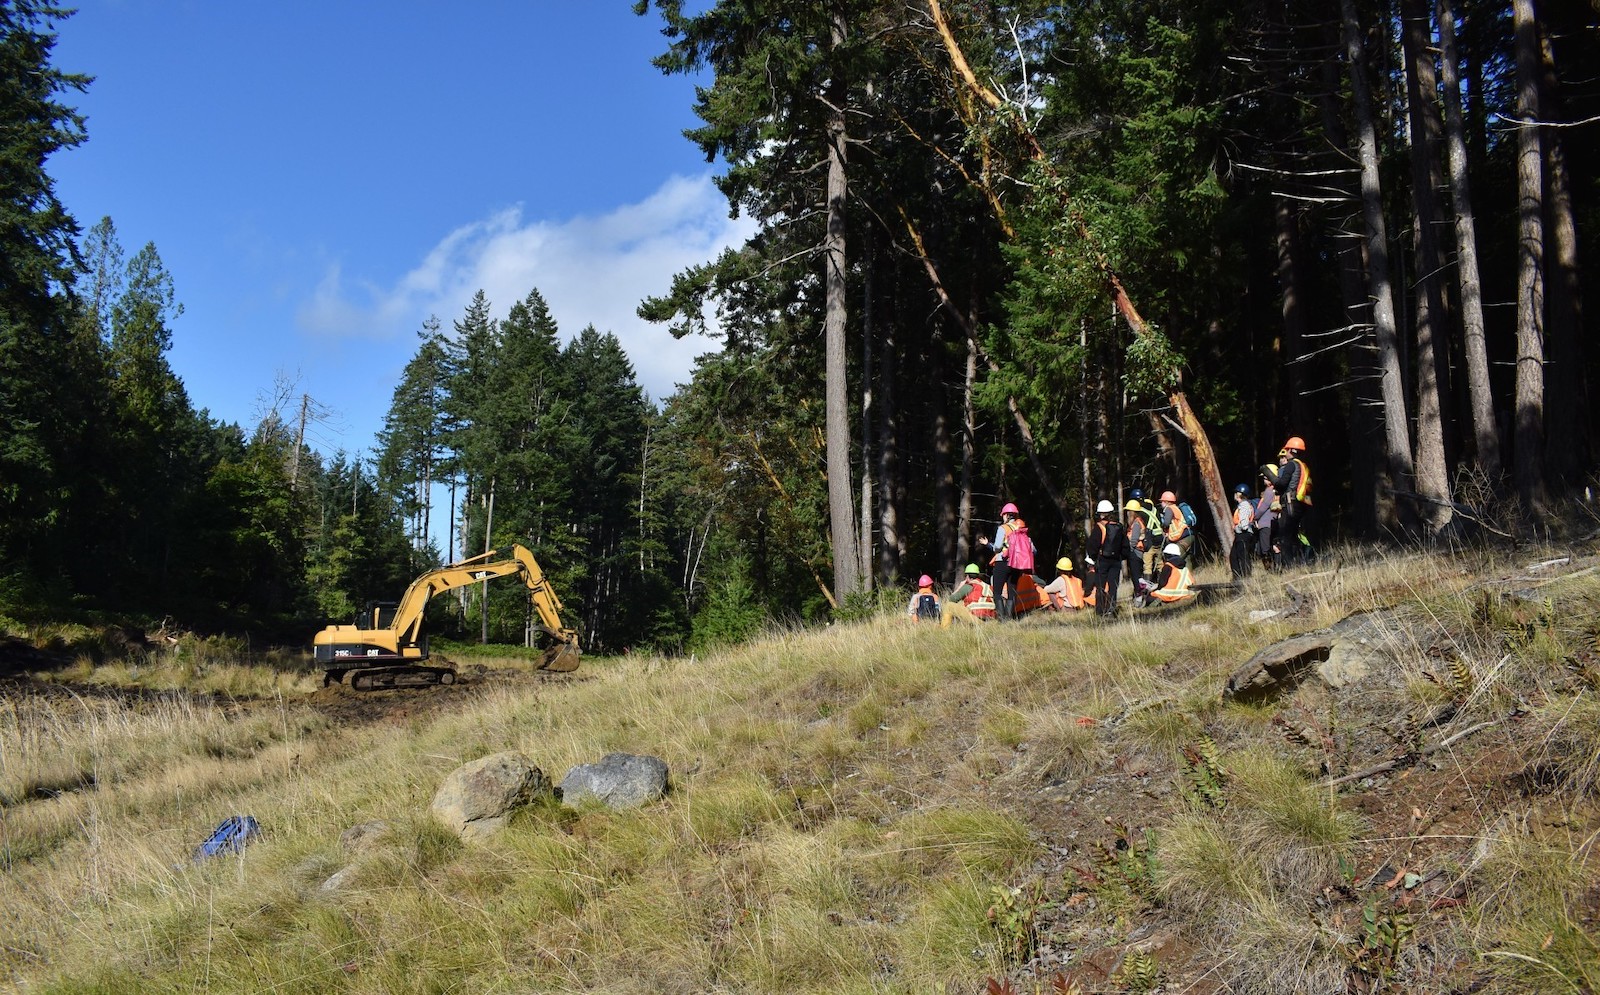 A cluster of about 12 people gather in a grassy setting. To their left stands an excavator tractor.